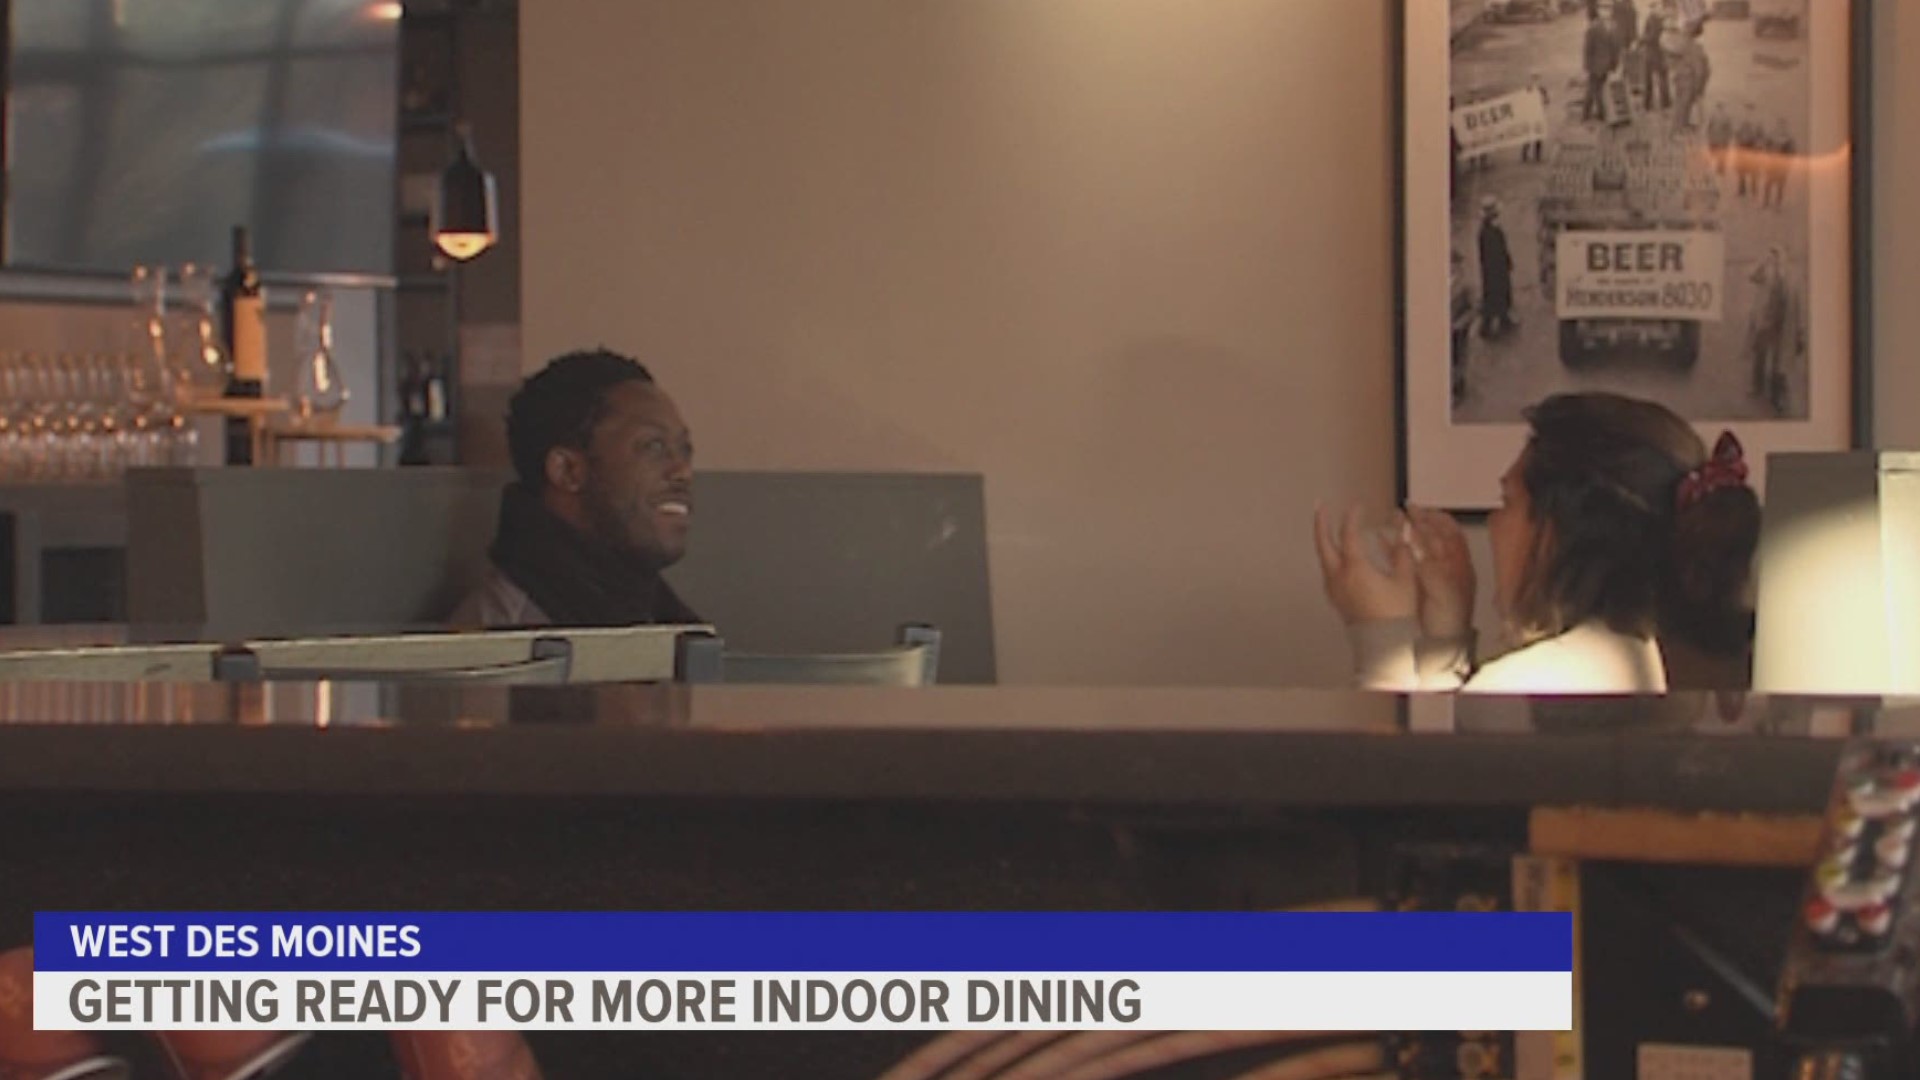 The West Des Moines establishment is hoping their $5,000 investment will make people more comfortable eating indoors.